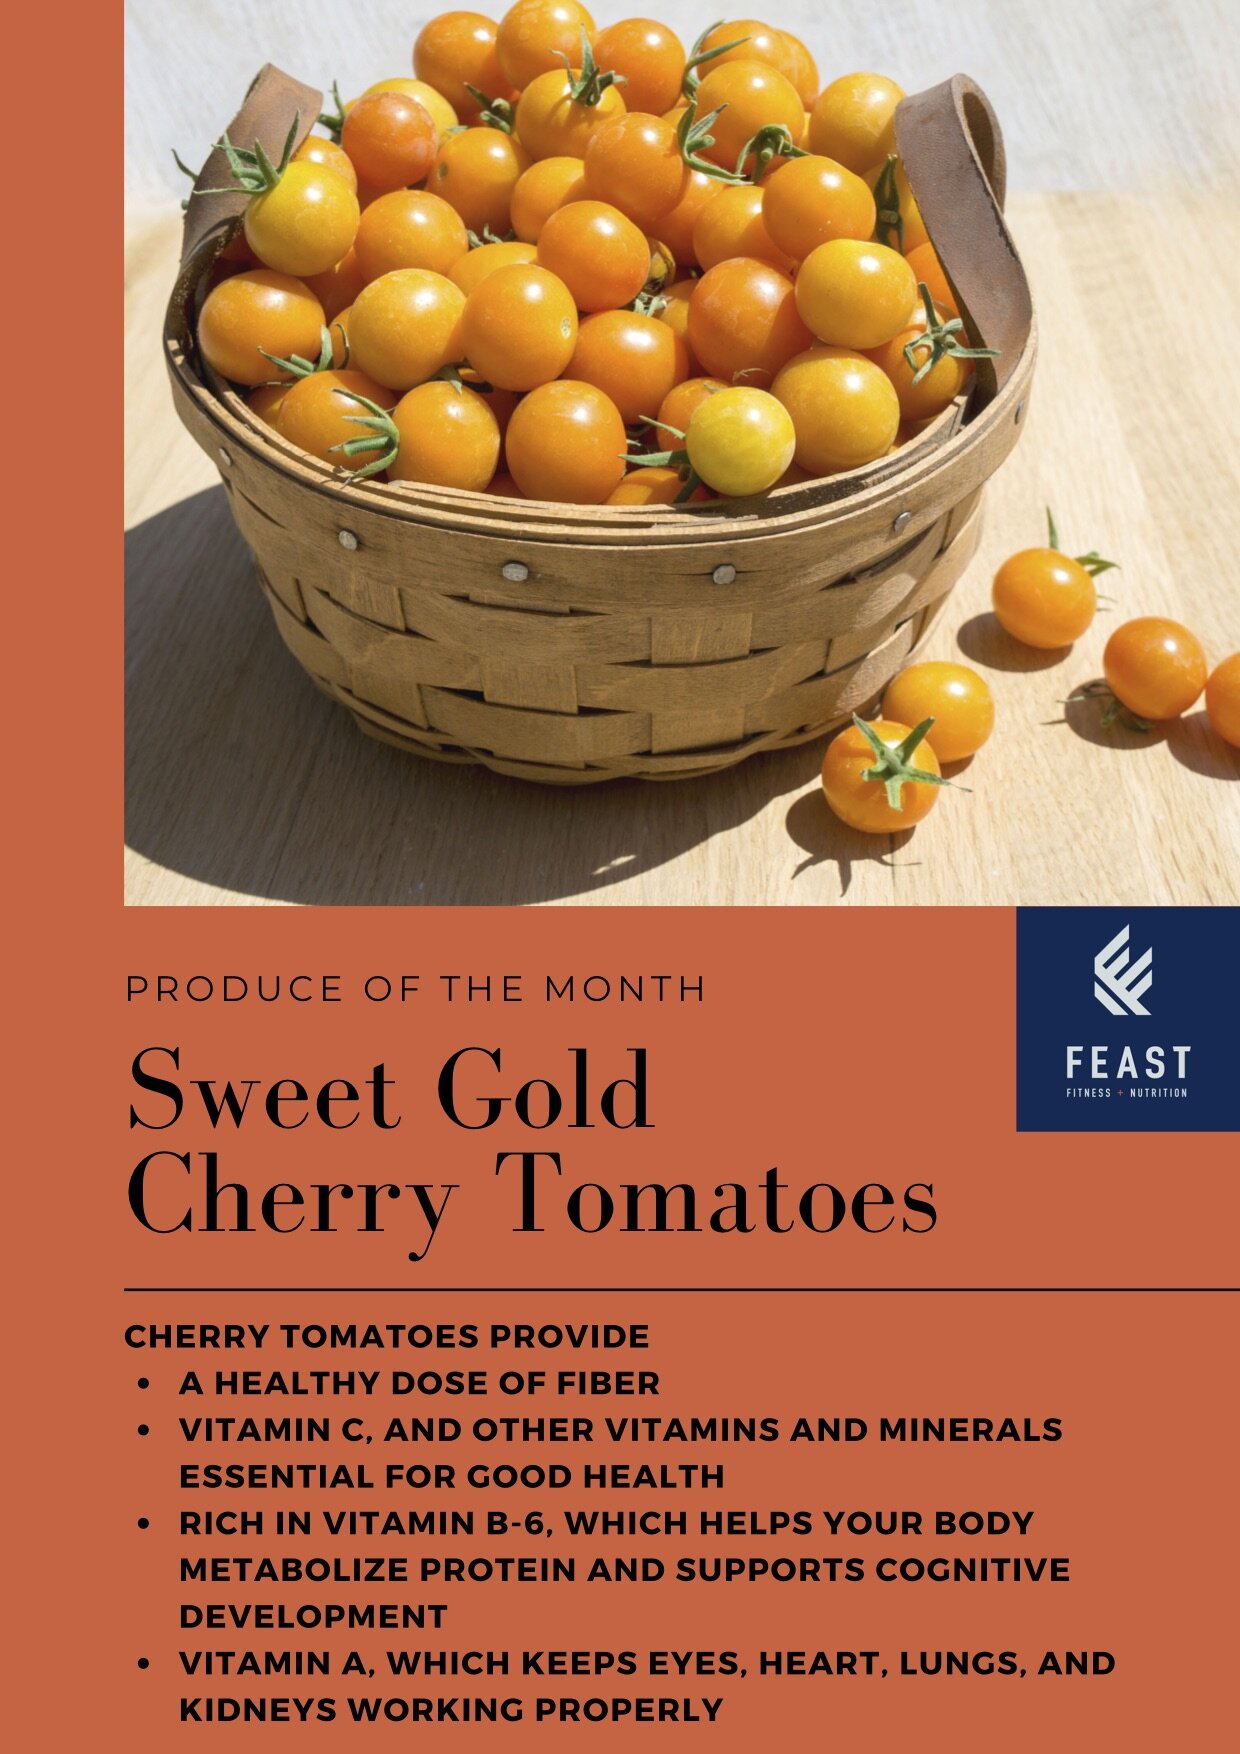 Feast Produce of the Month Sweet Gold Cherry Tomatoes.jpg